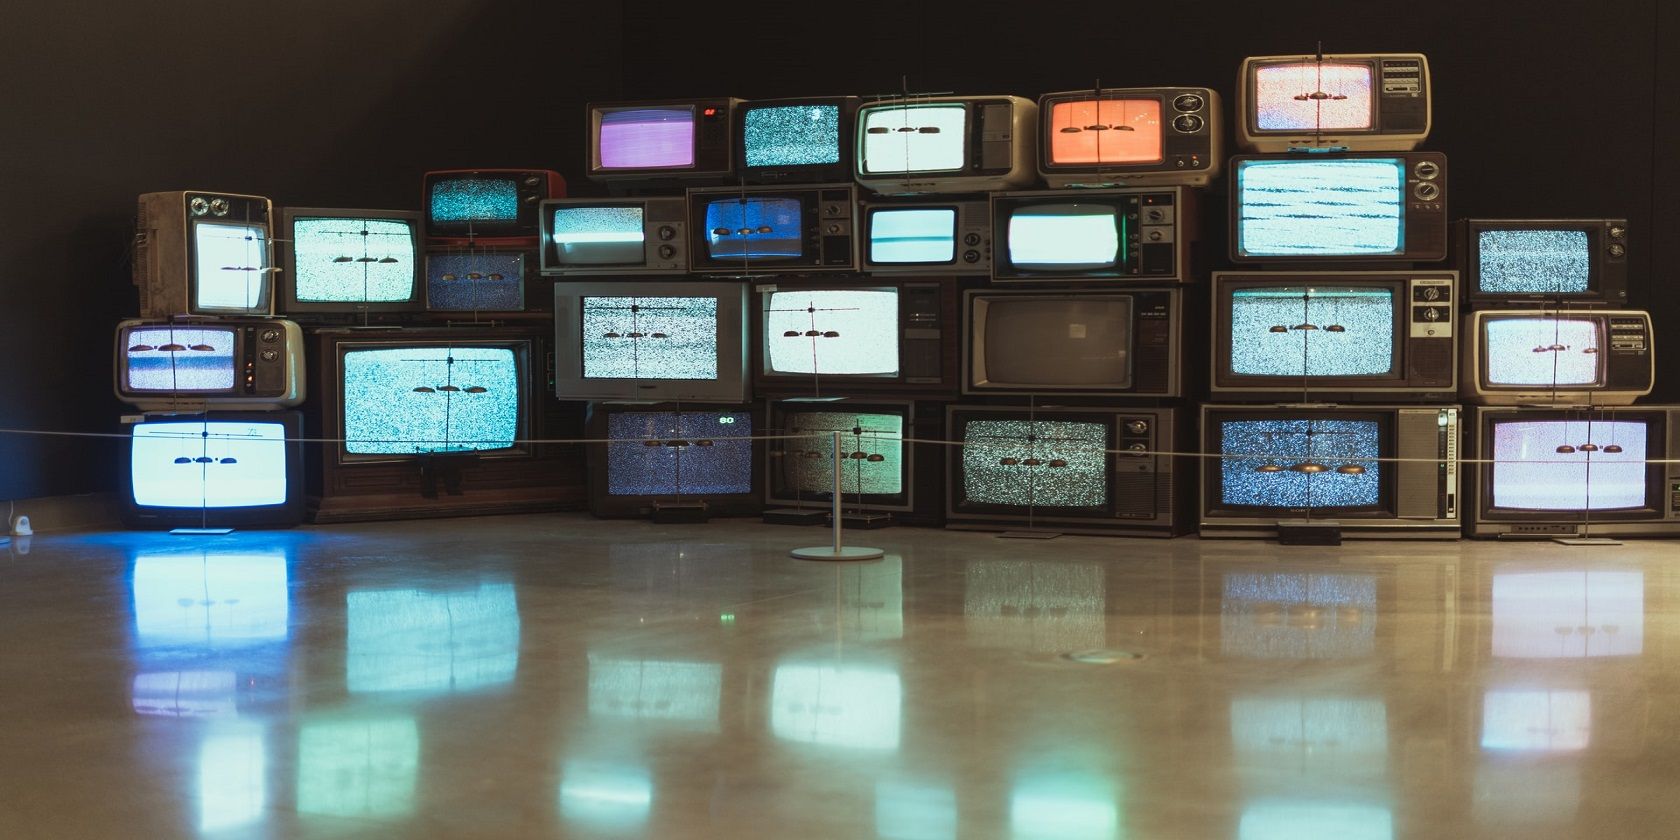 Selection of TVs from various eras